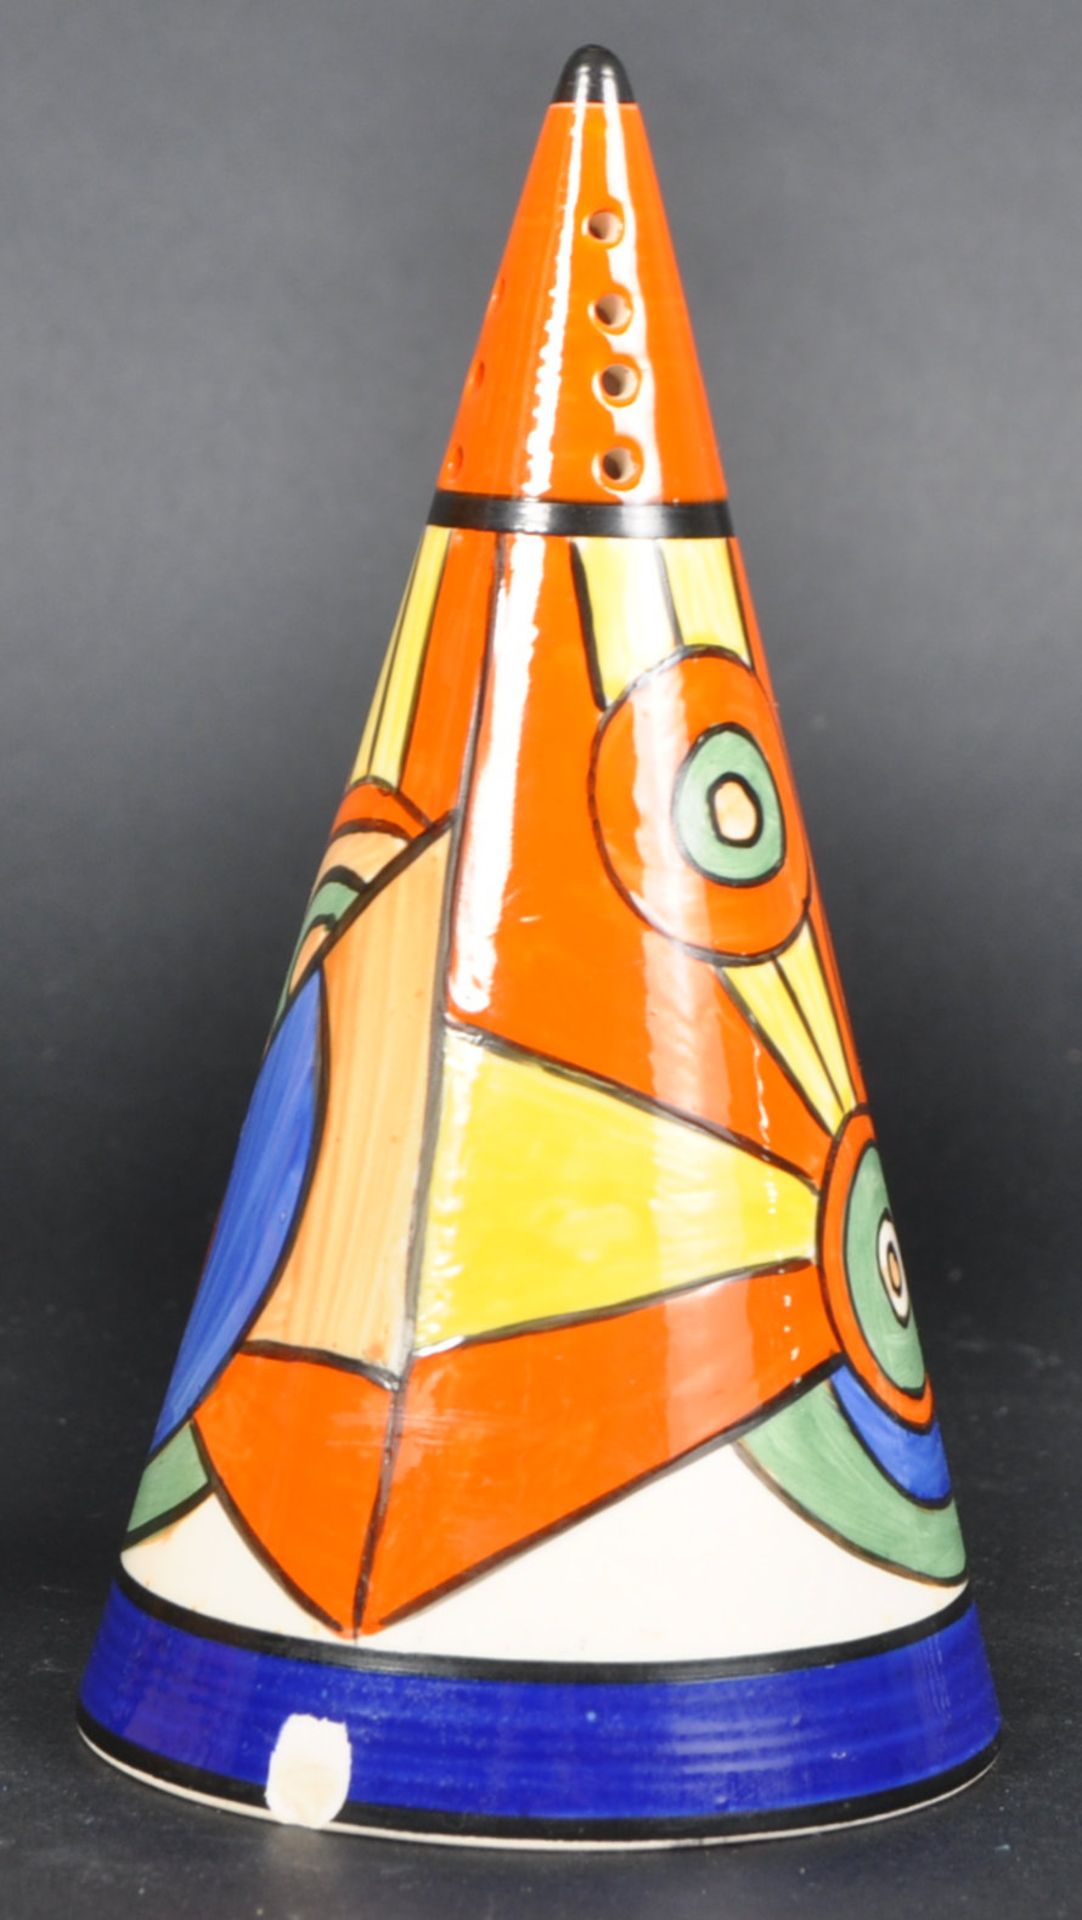 CLARICE CLIFF SLICED CIRCLE CONICAL SUGAR SIFTER - Image 4 of 6